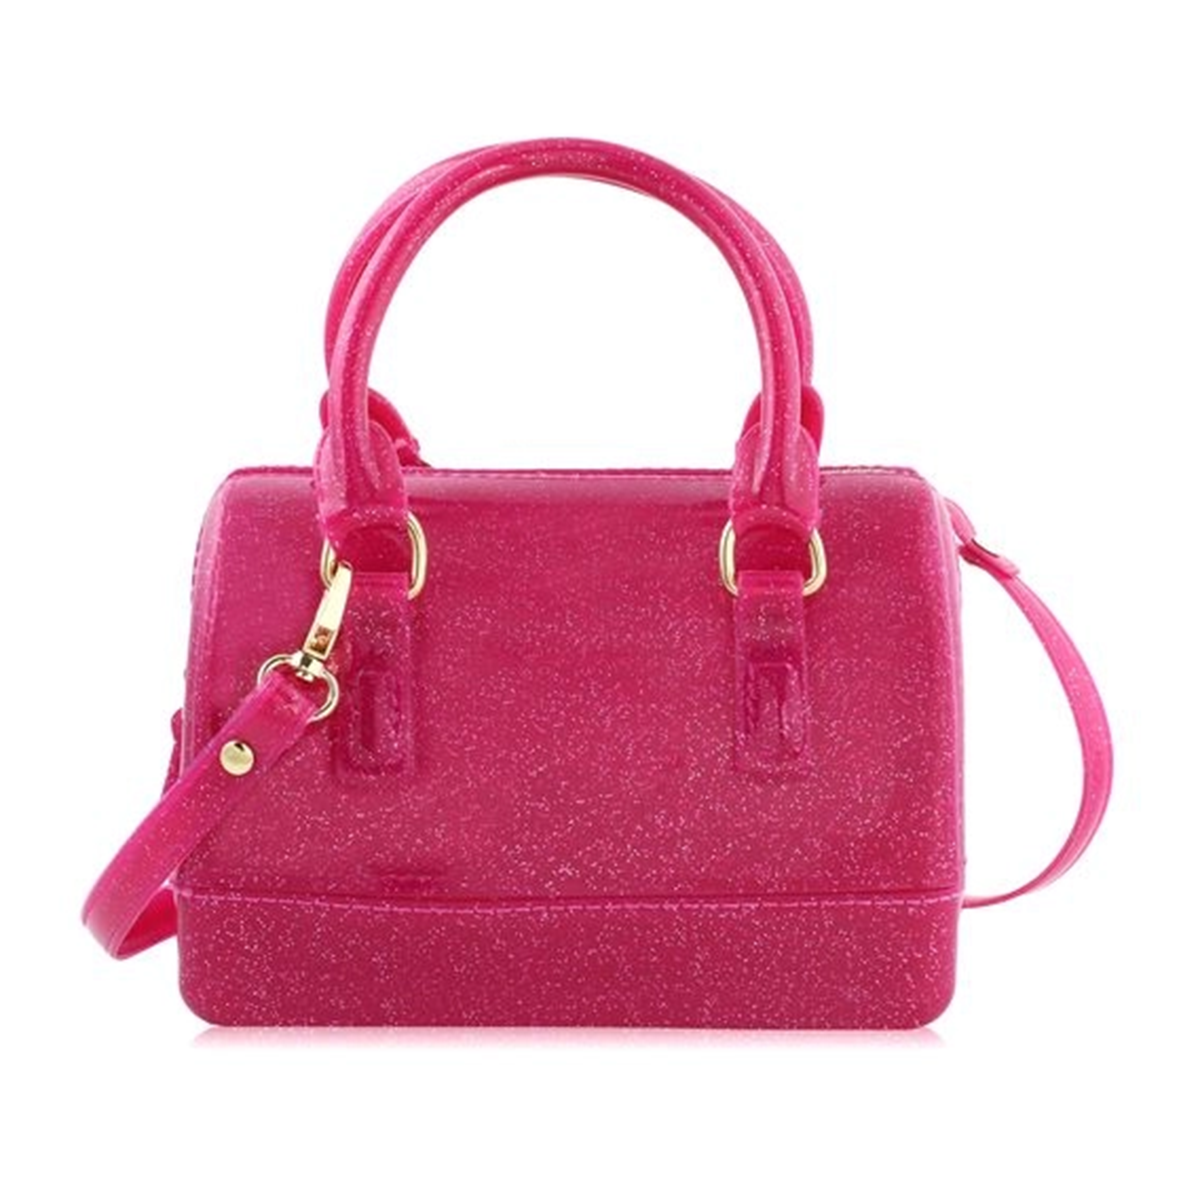 Buy Top Handle Silicone Handbag Jelly Purse With Optional Shoulder Strap -  Pink at Amazon.in